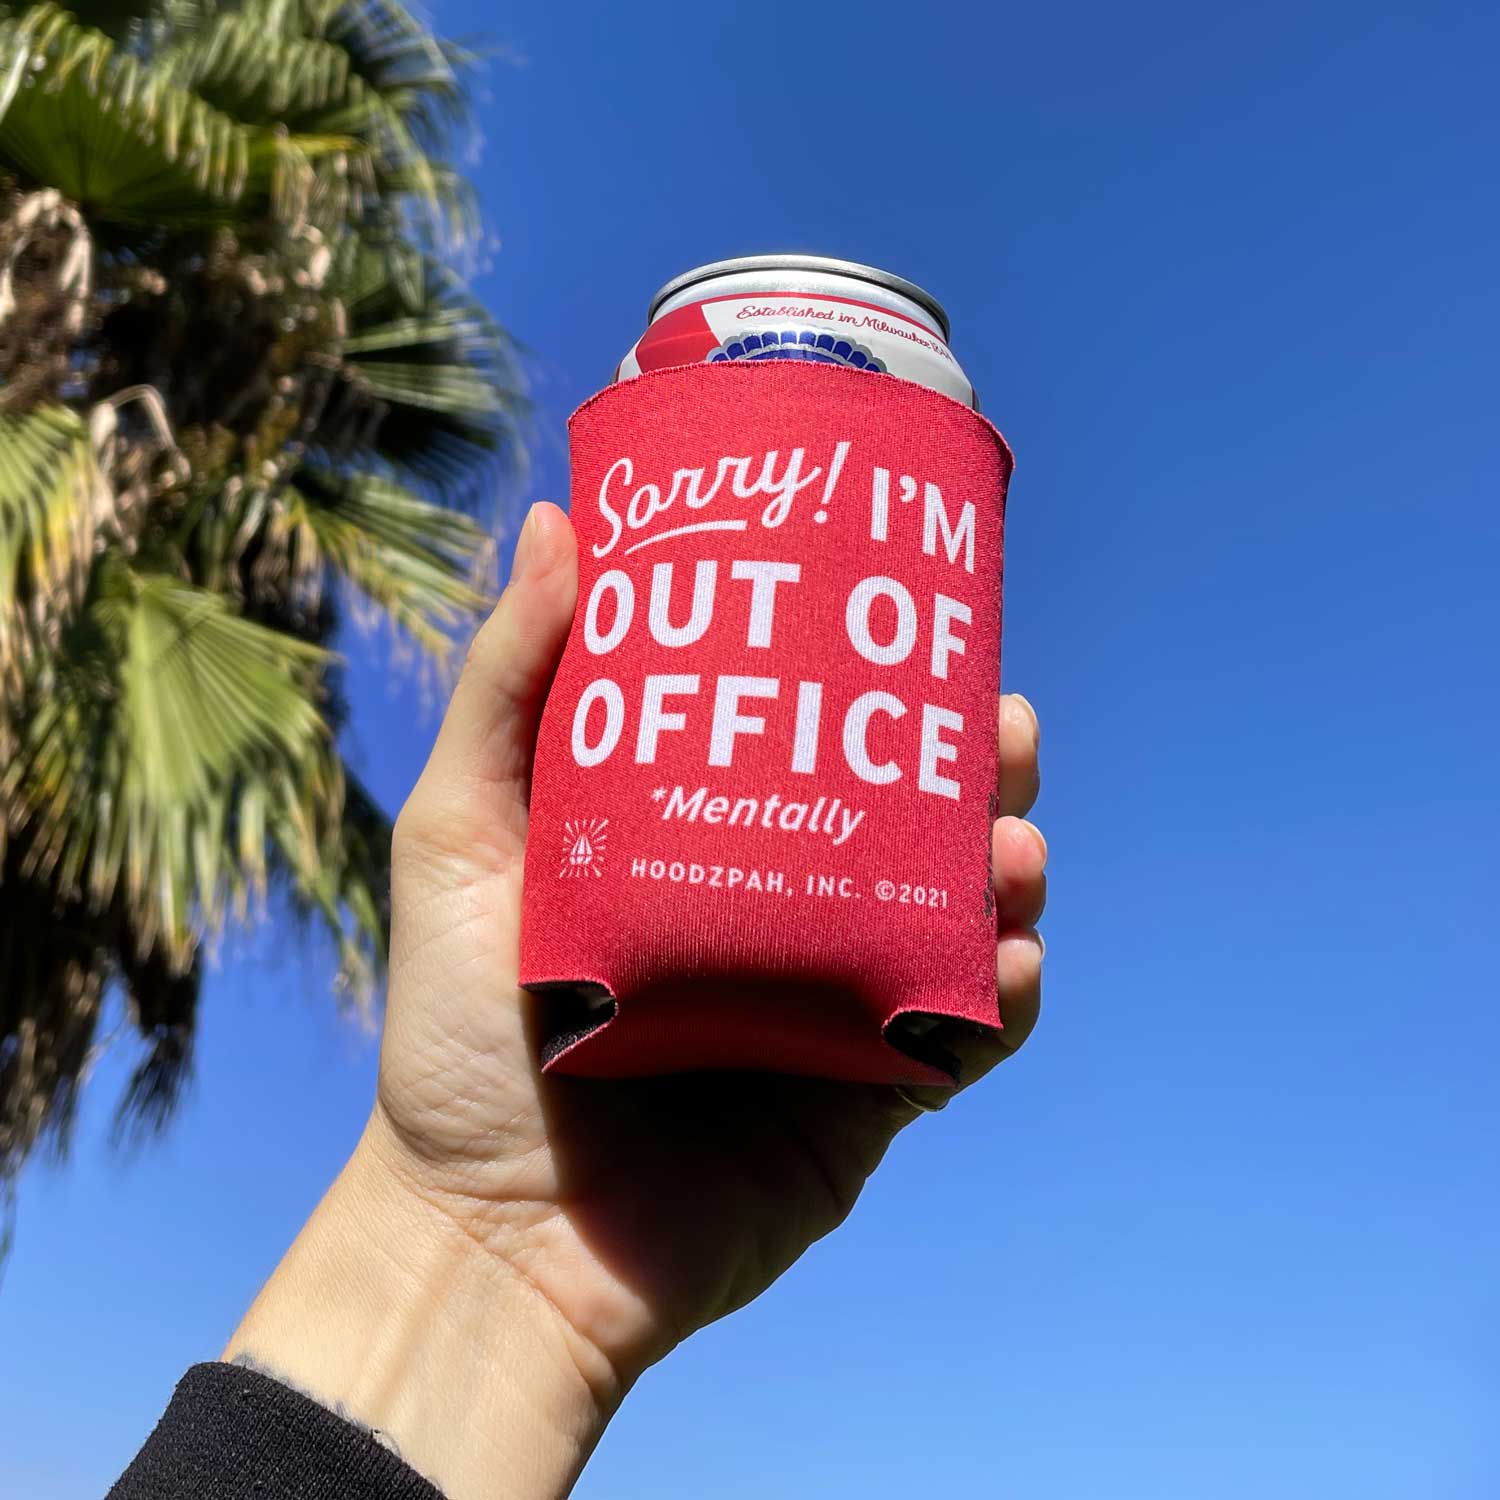 Out of Office Koozie by Hoodzpah in front of palm tree